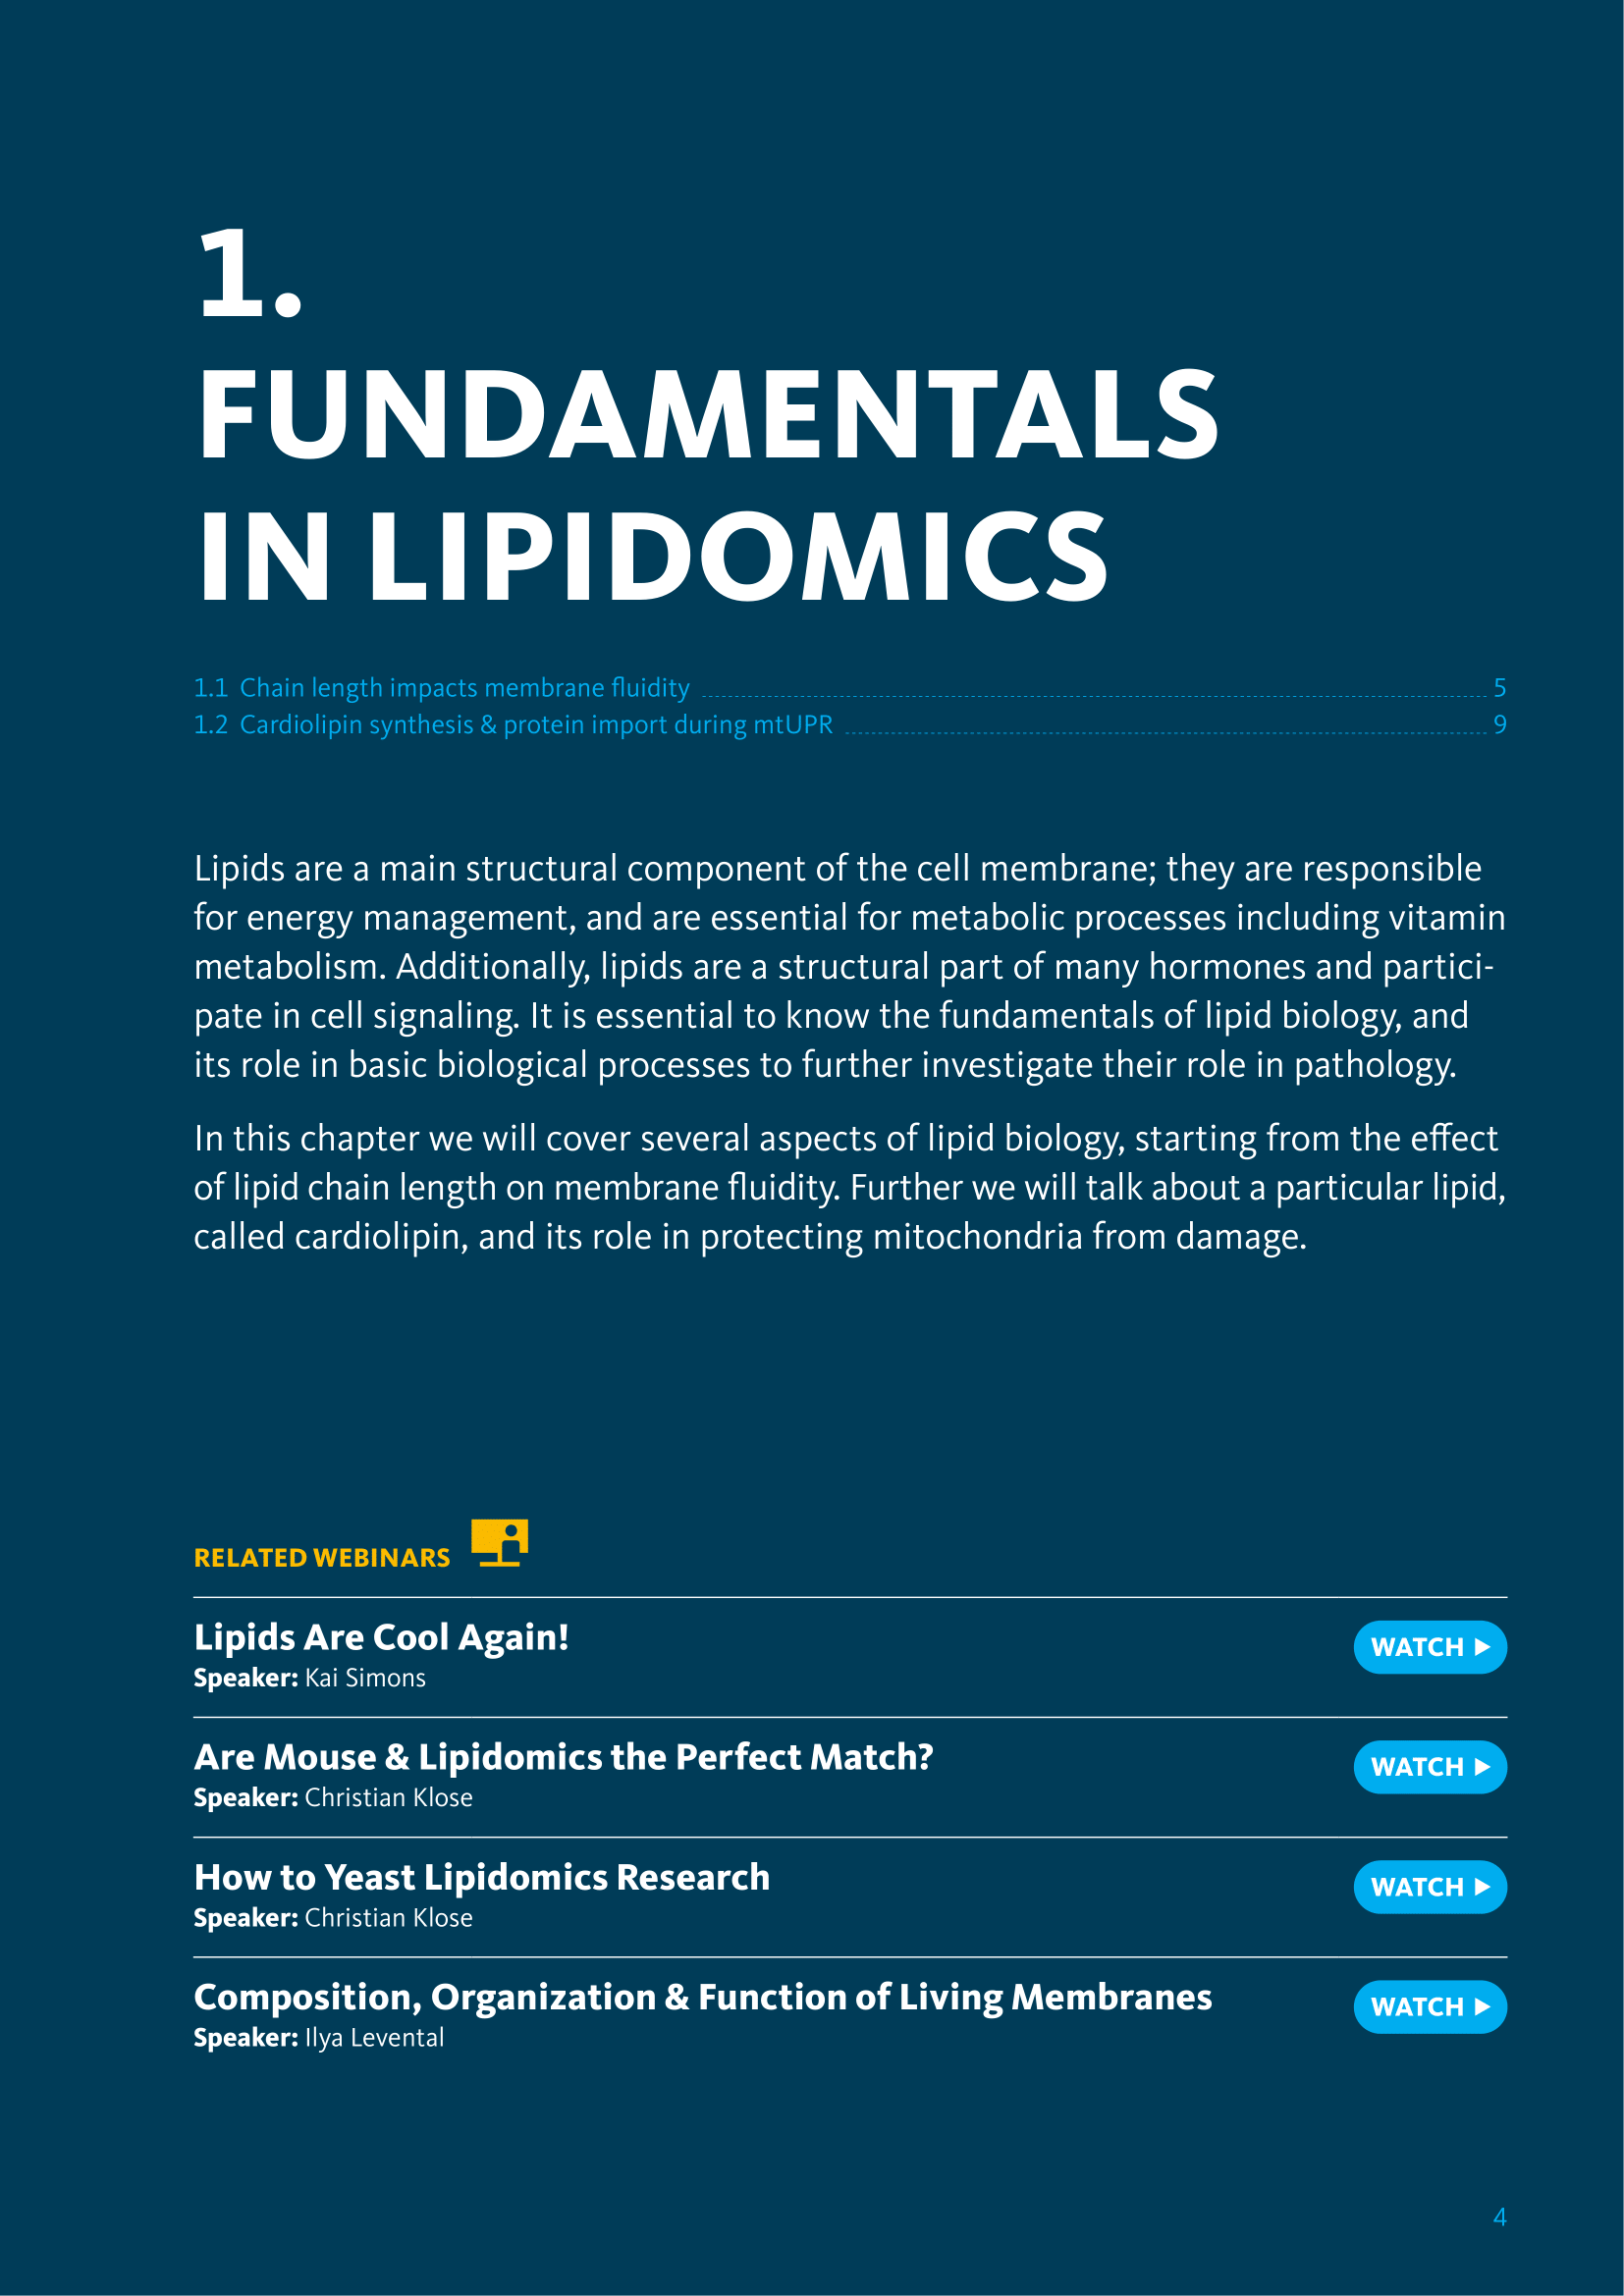 The Book of Lipidomics - 5th Edition, page 4